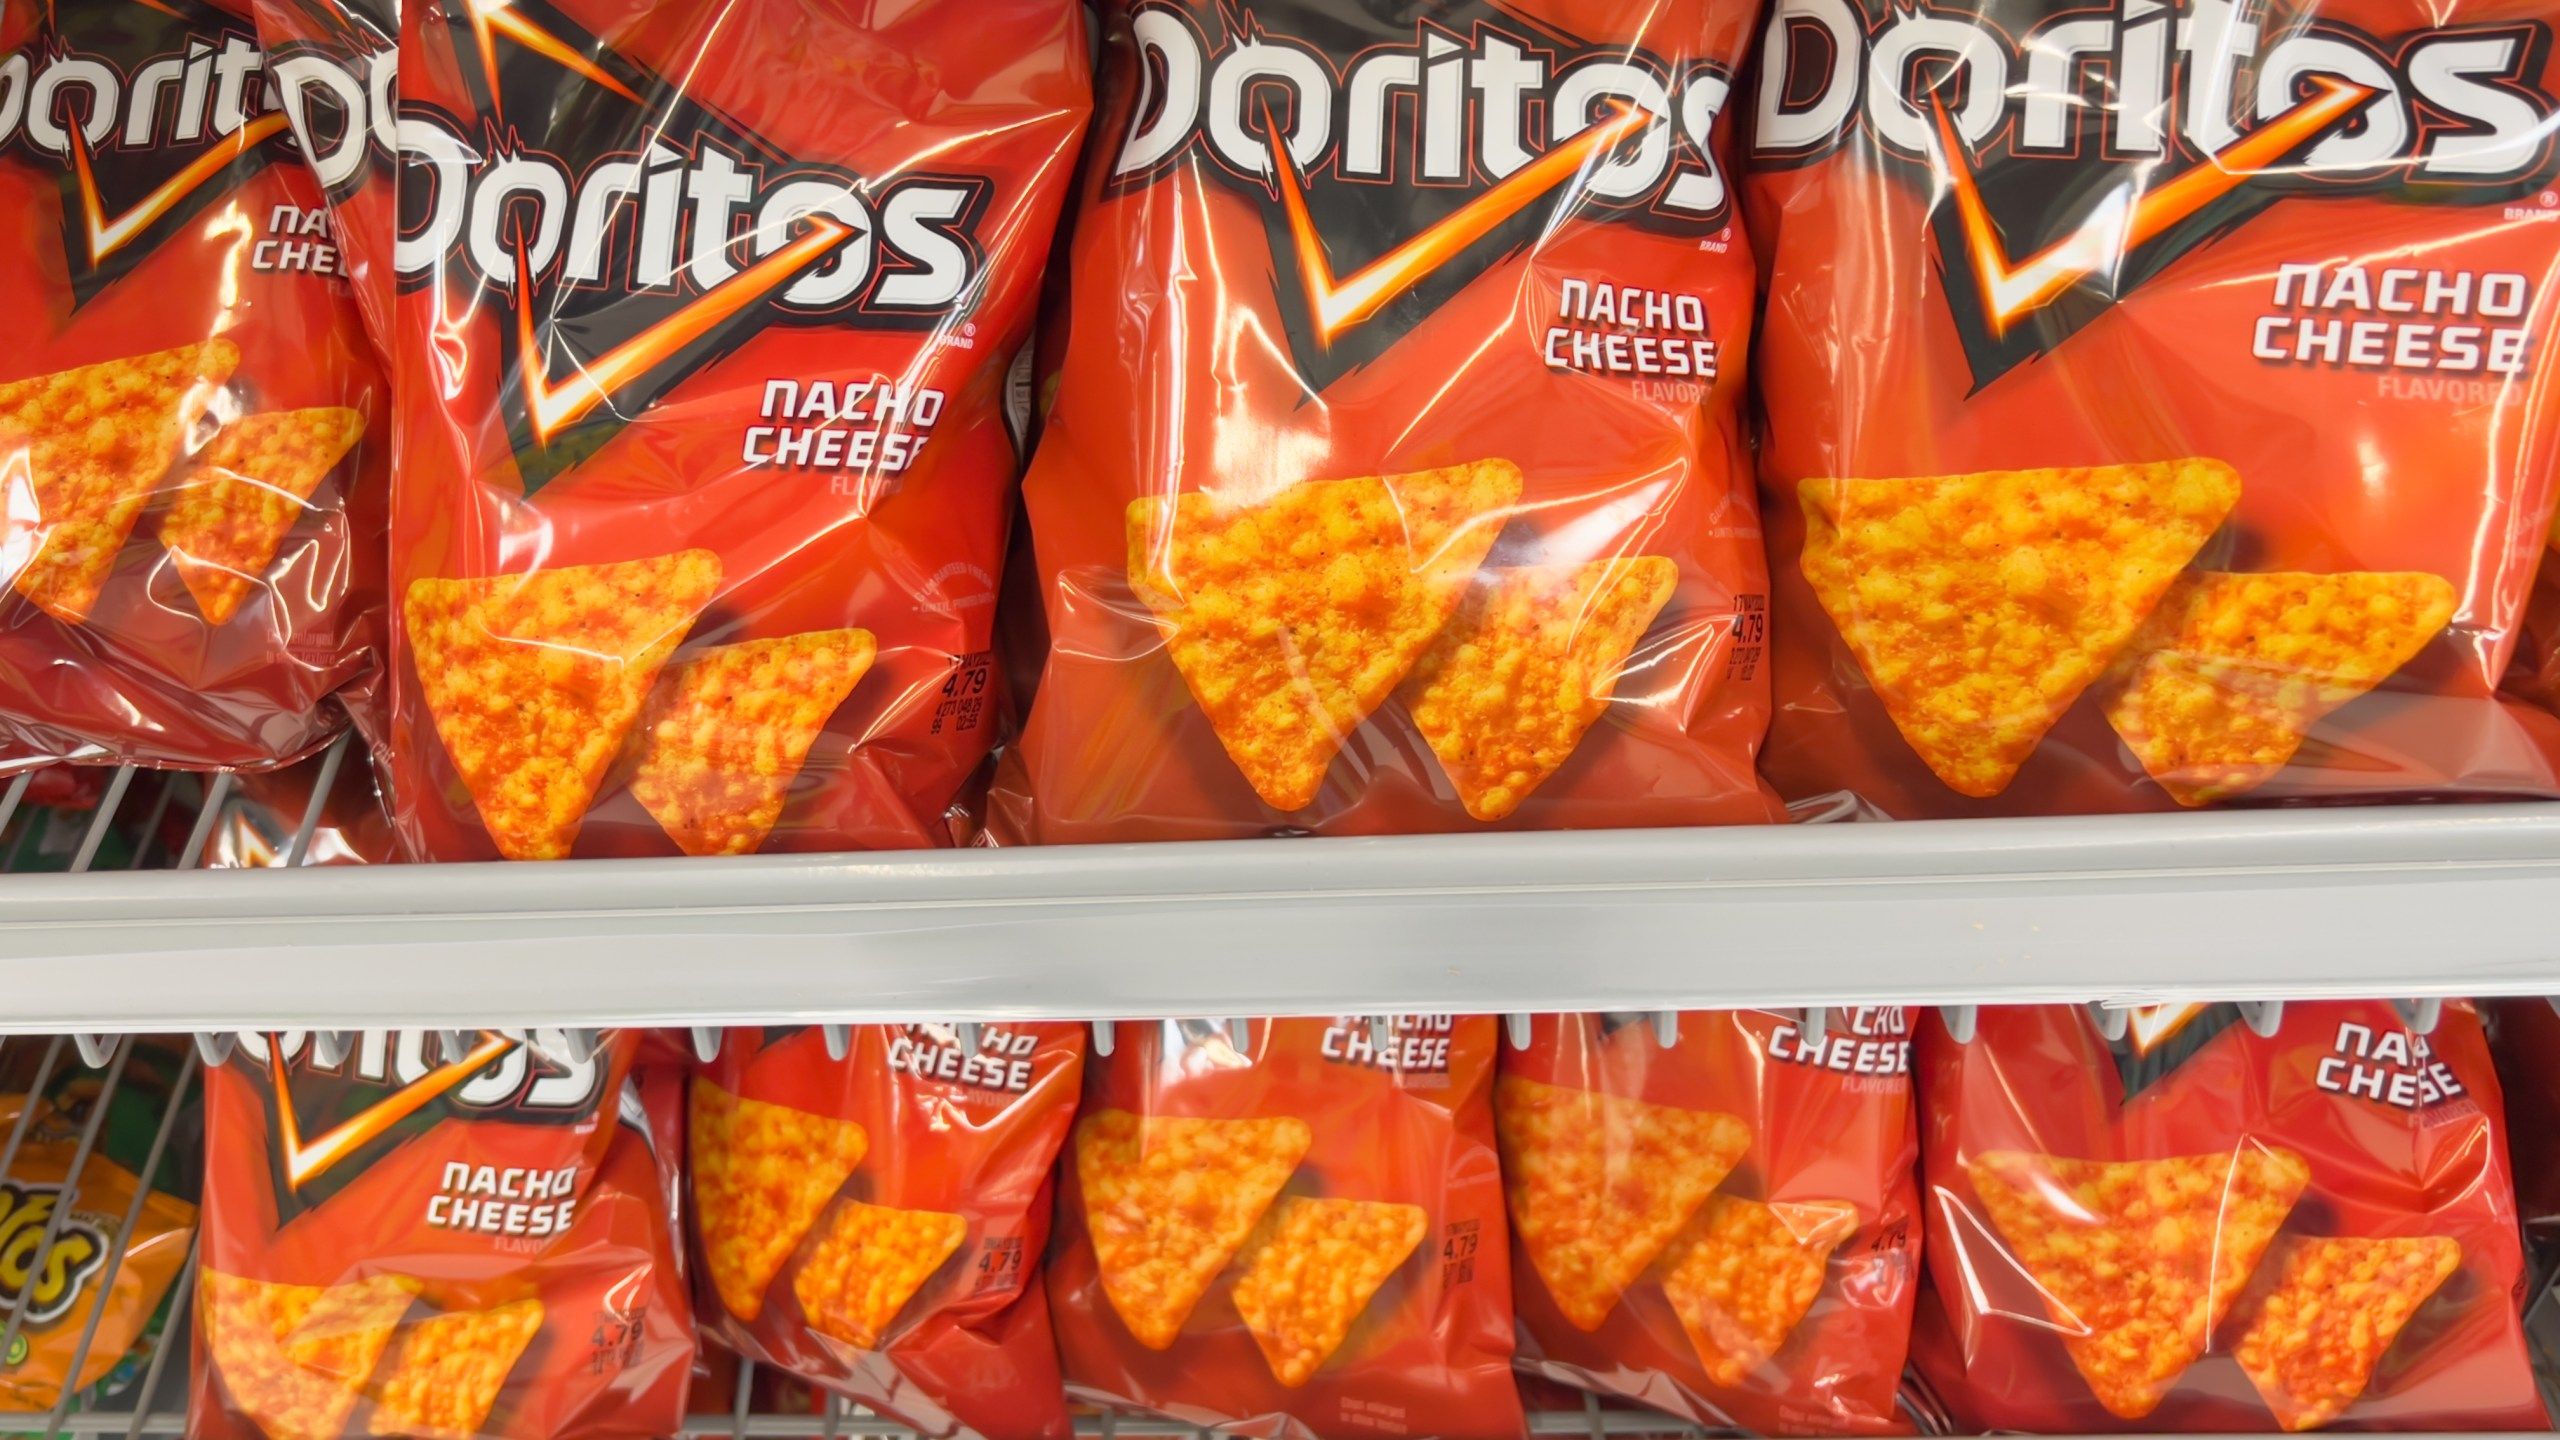 A shelf of bags of Doritos, a brand of snack chips produced by Frito-Lay. - Doritos